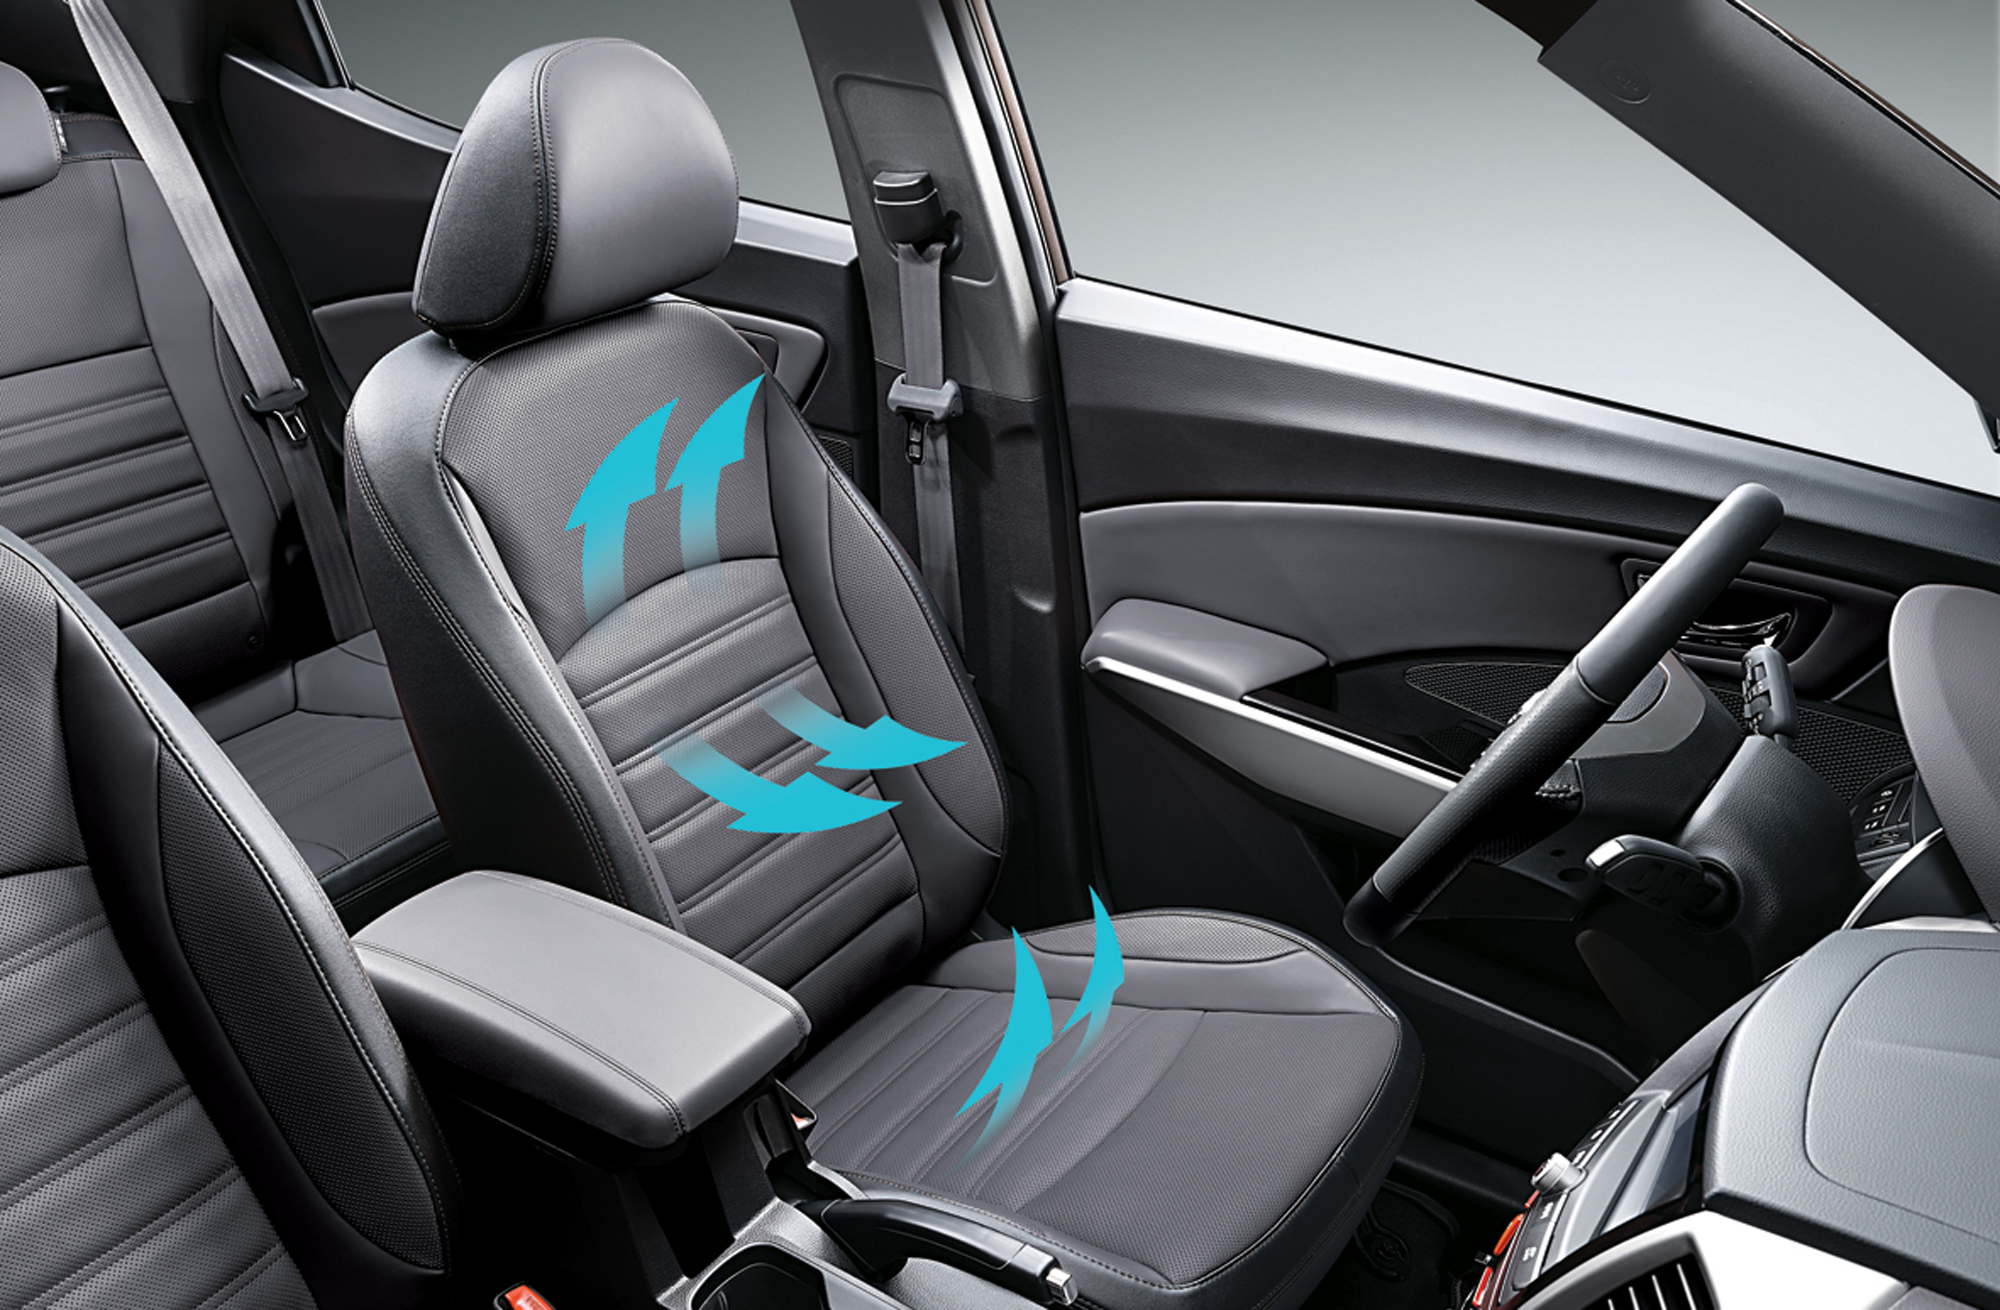 What Are Ventilated Seats In A Car